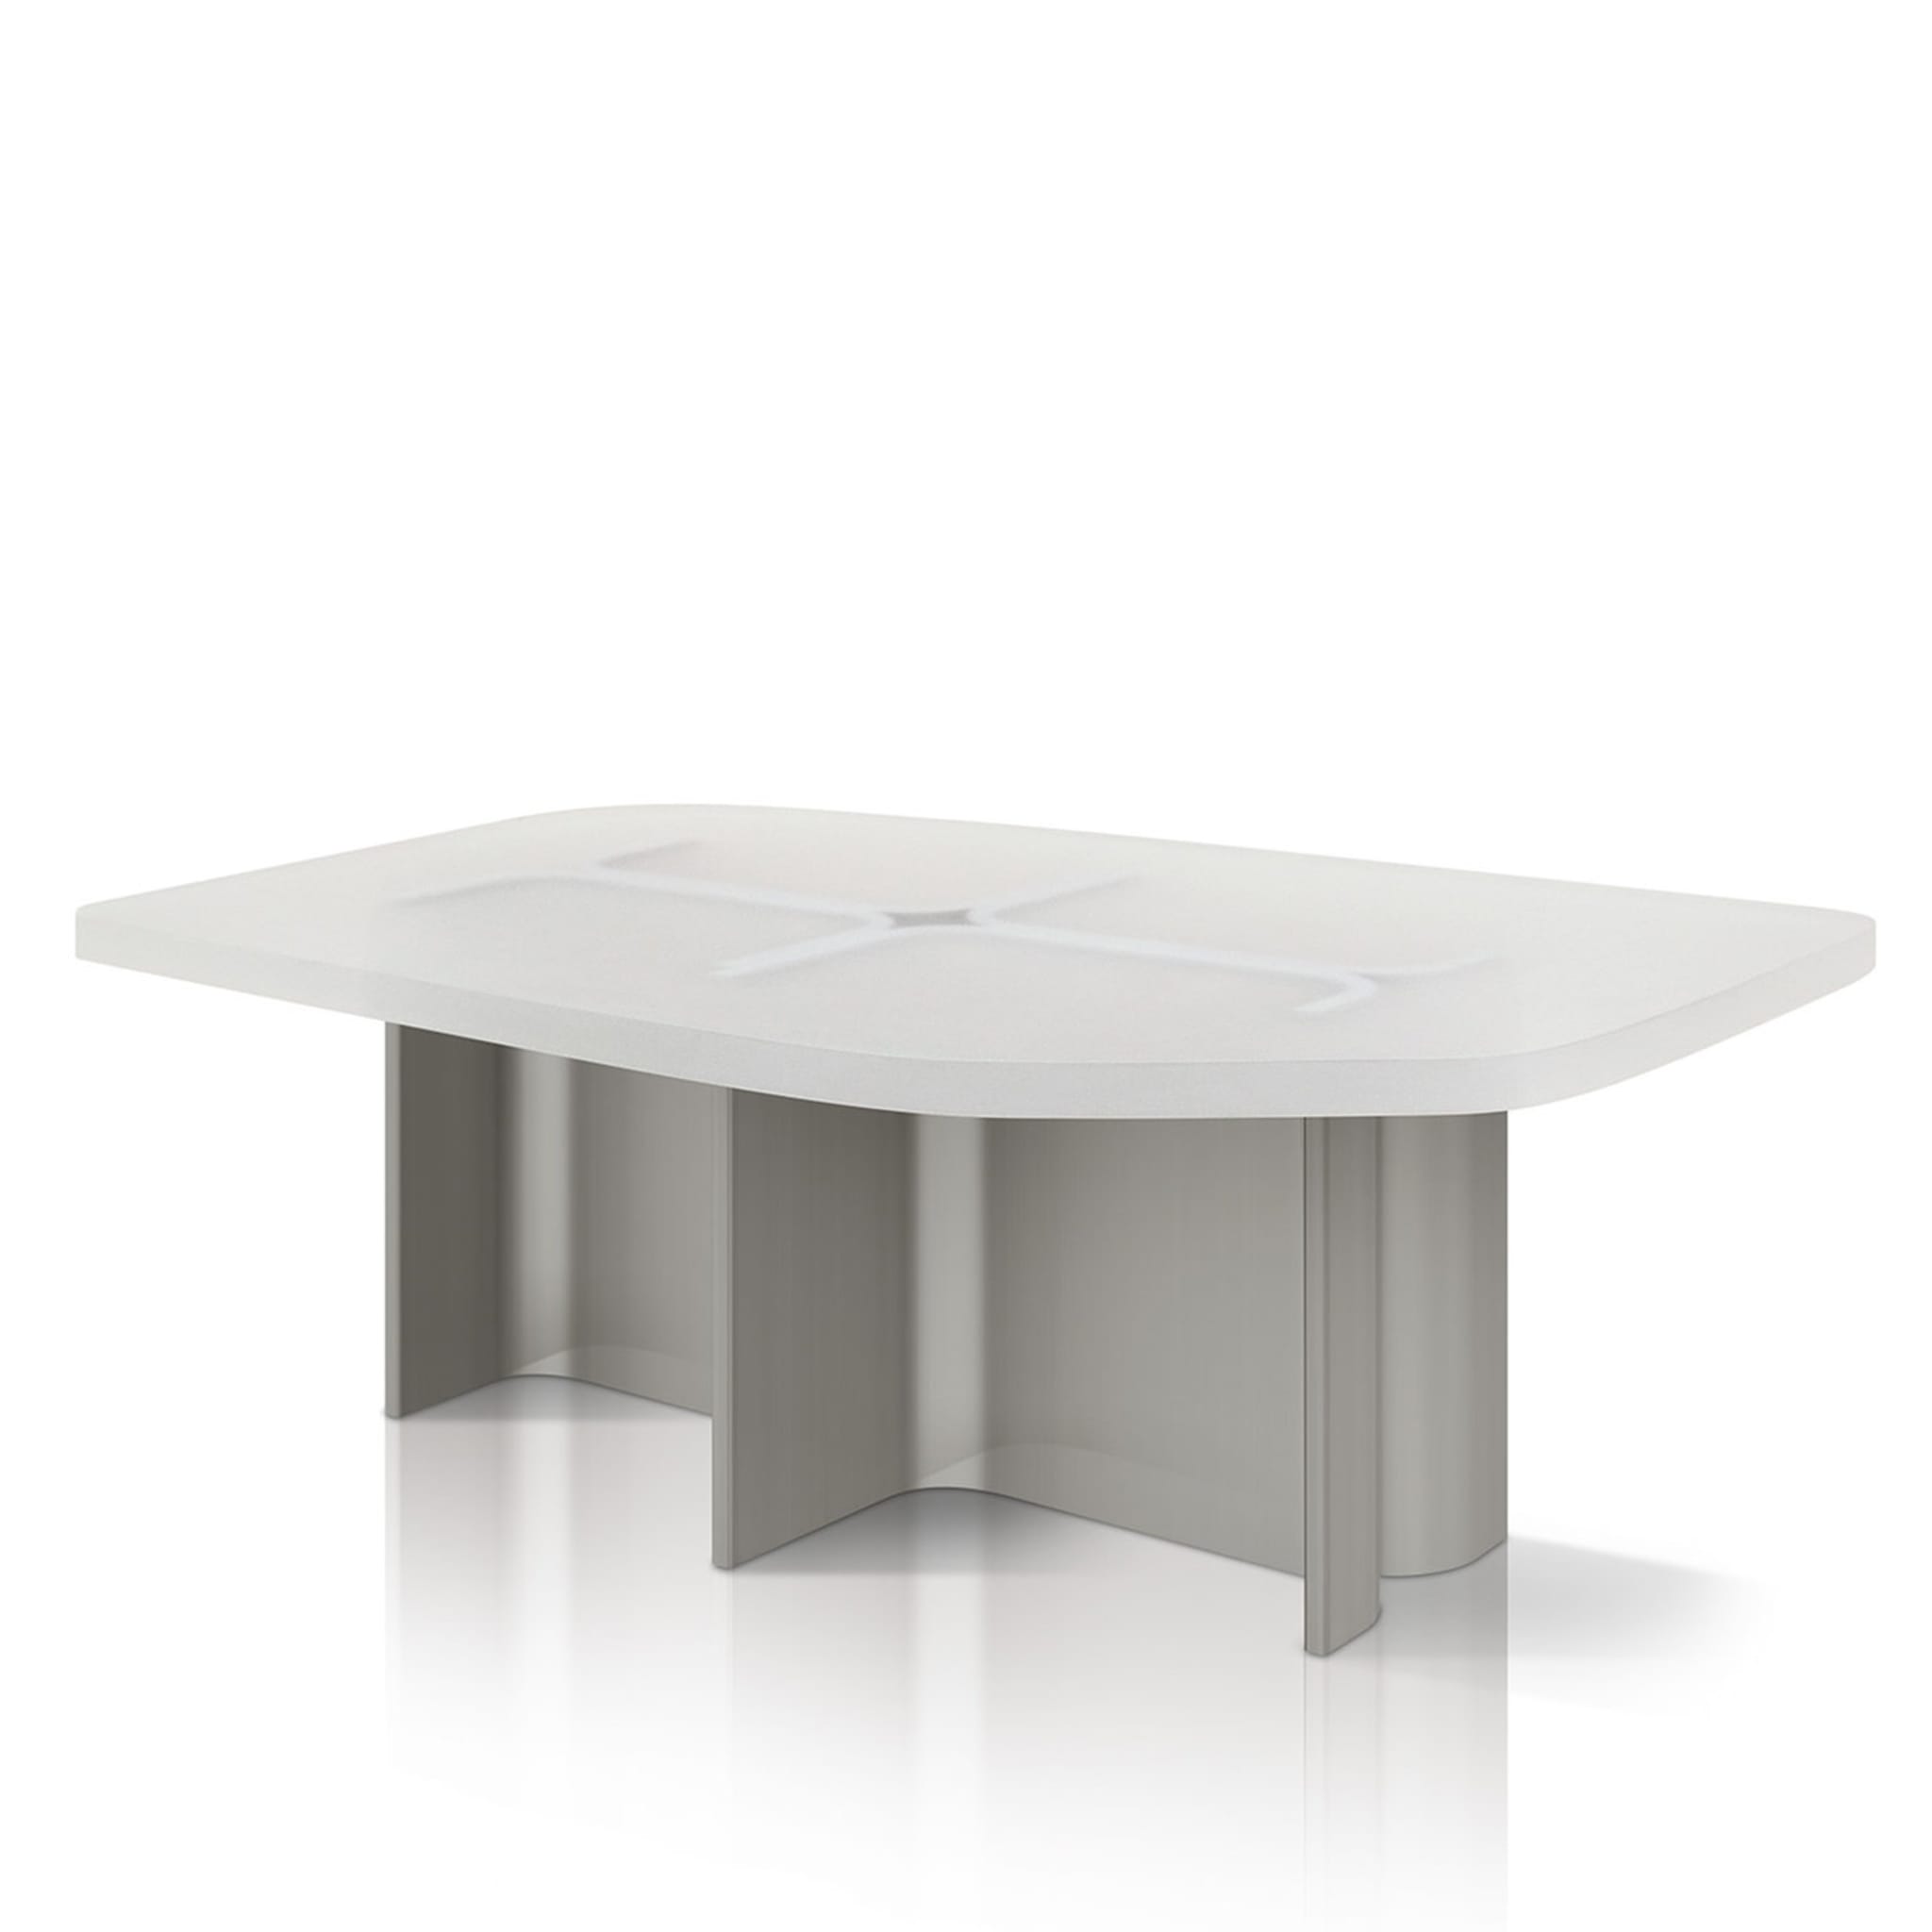 Fossil Silver Coffee Table - Alternative view 1